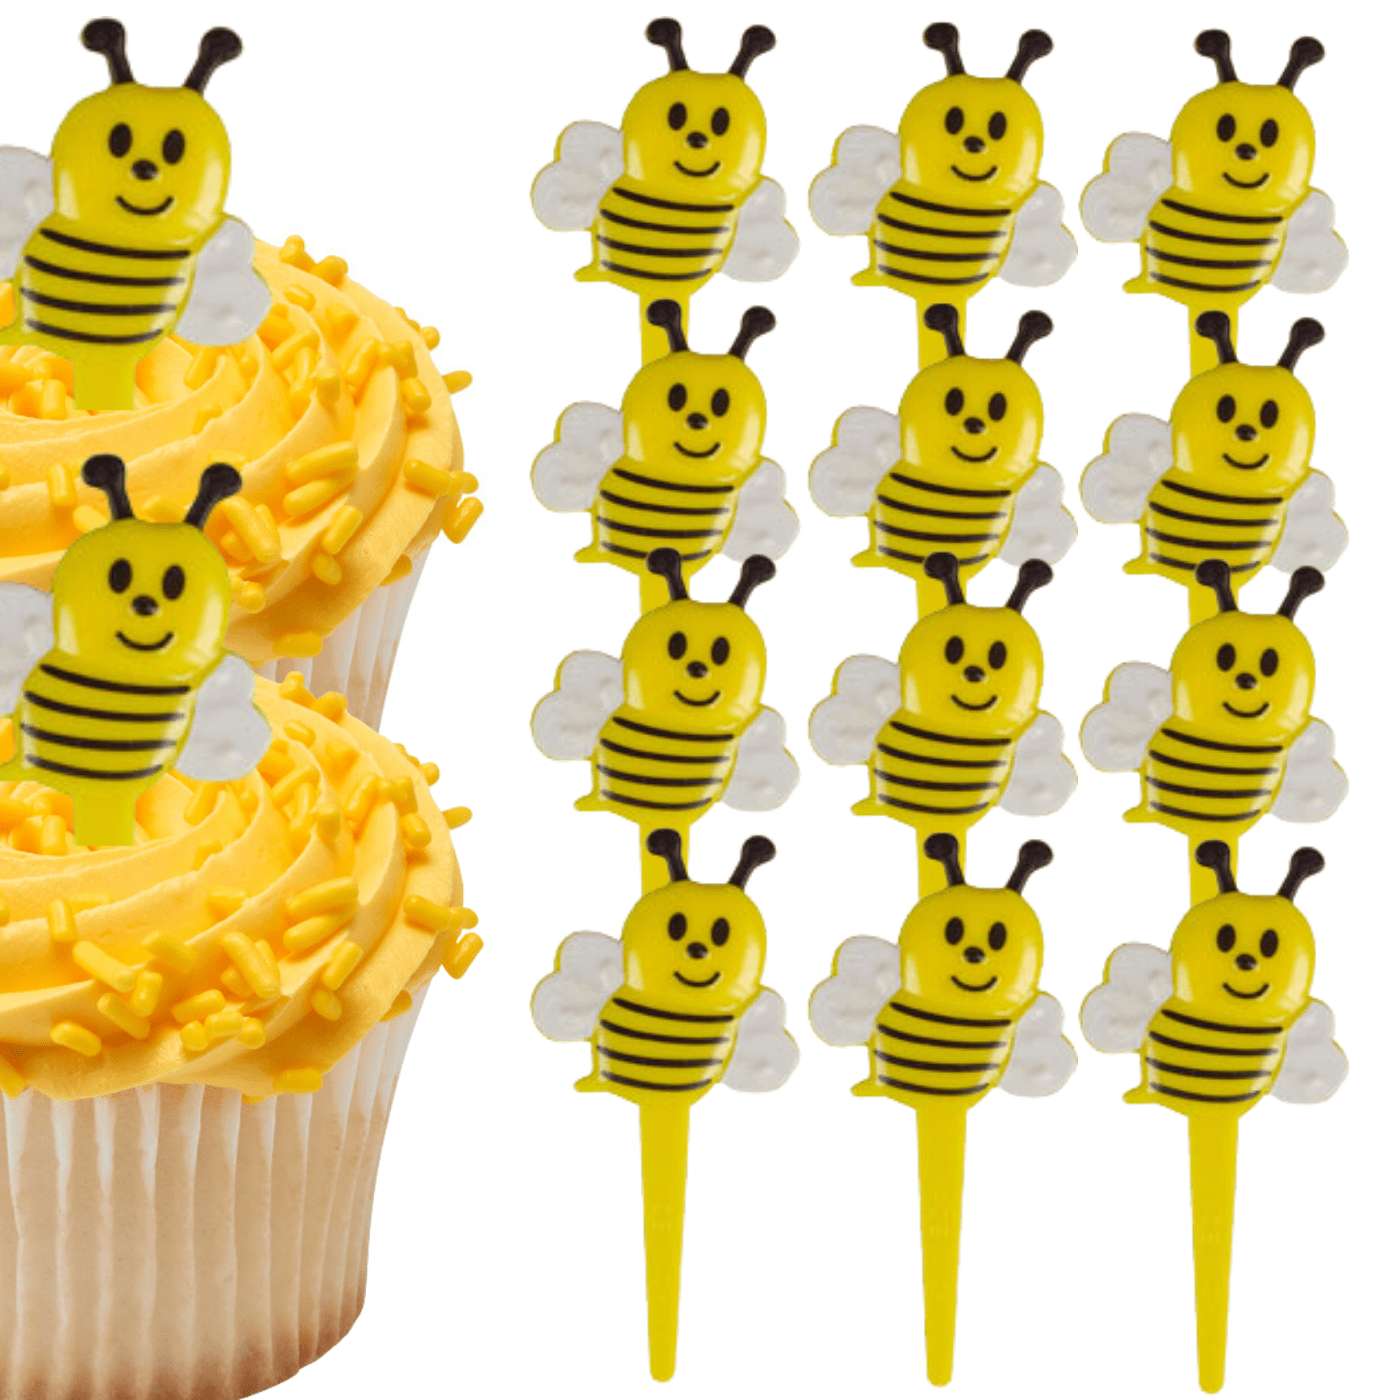 Edible Fondant Bees, Bee Cupcake Toppers, Bee Cupcake Decor, Edible Bee  Cupcake, Bee Cake Decor, Bee Cupcake Decorations, Bee Party Decor by  Devany's Designs